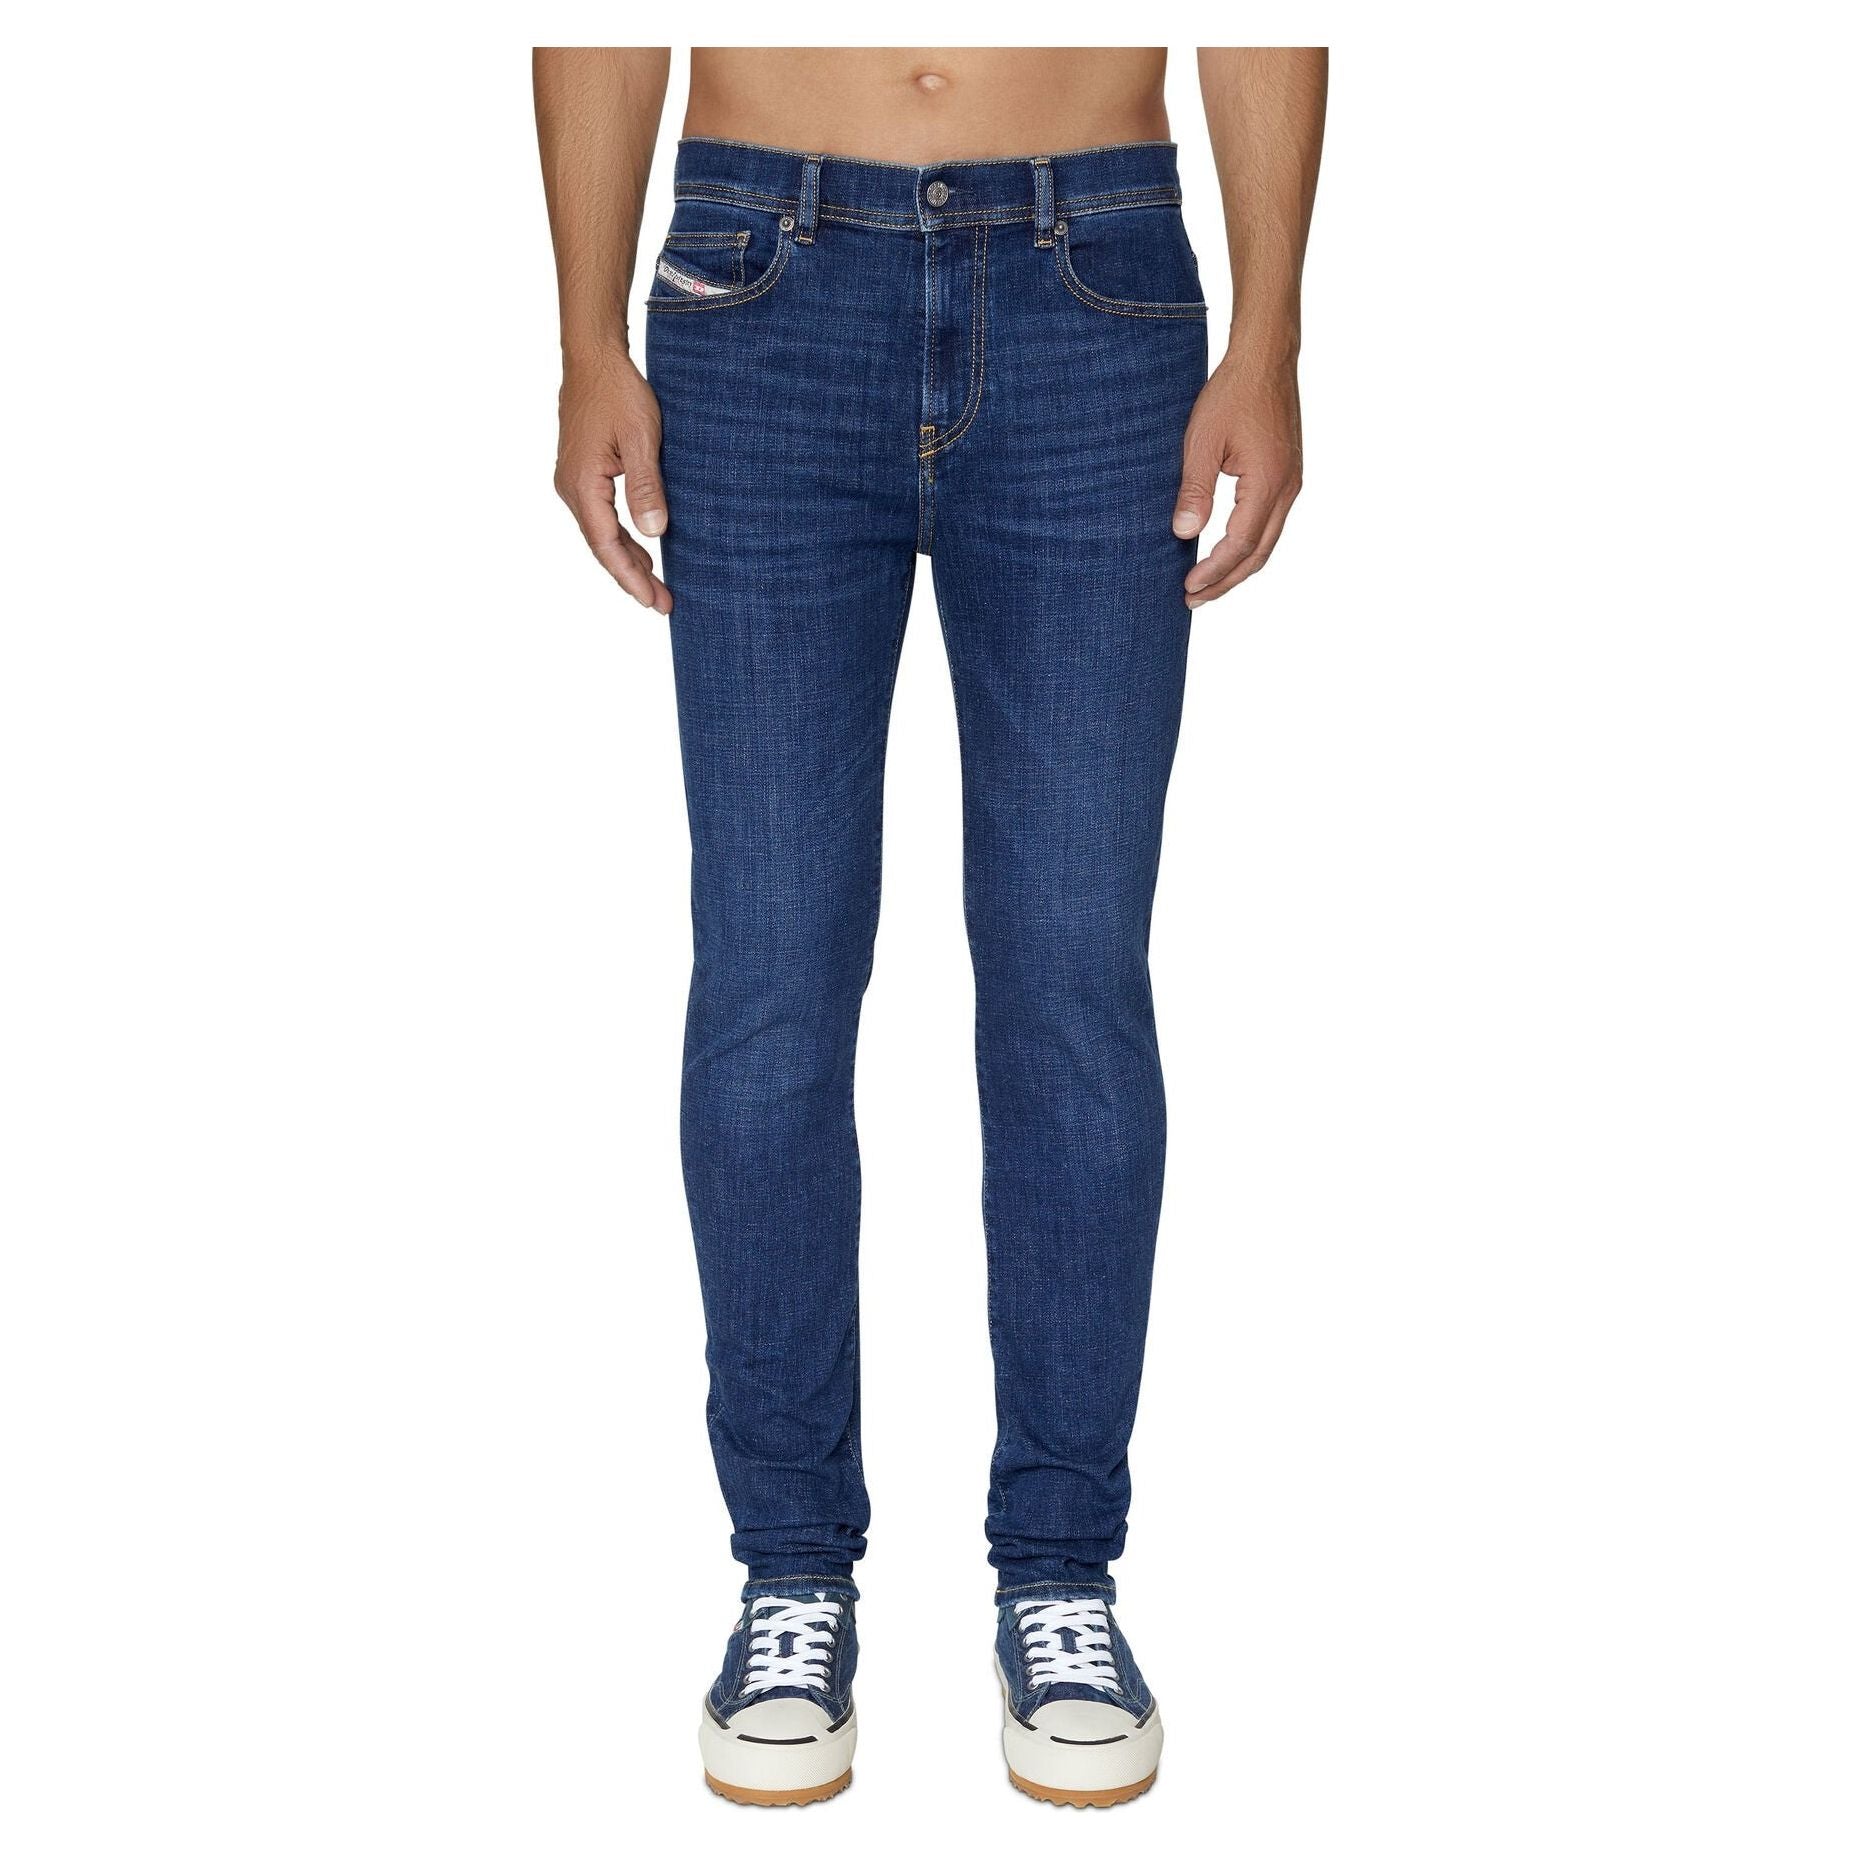 Diesel Jeans, Clothing and Accessories on Sale